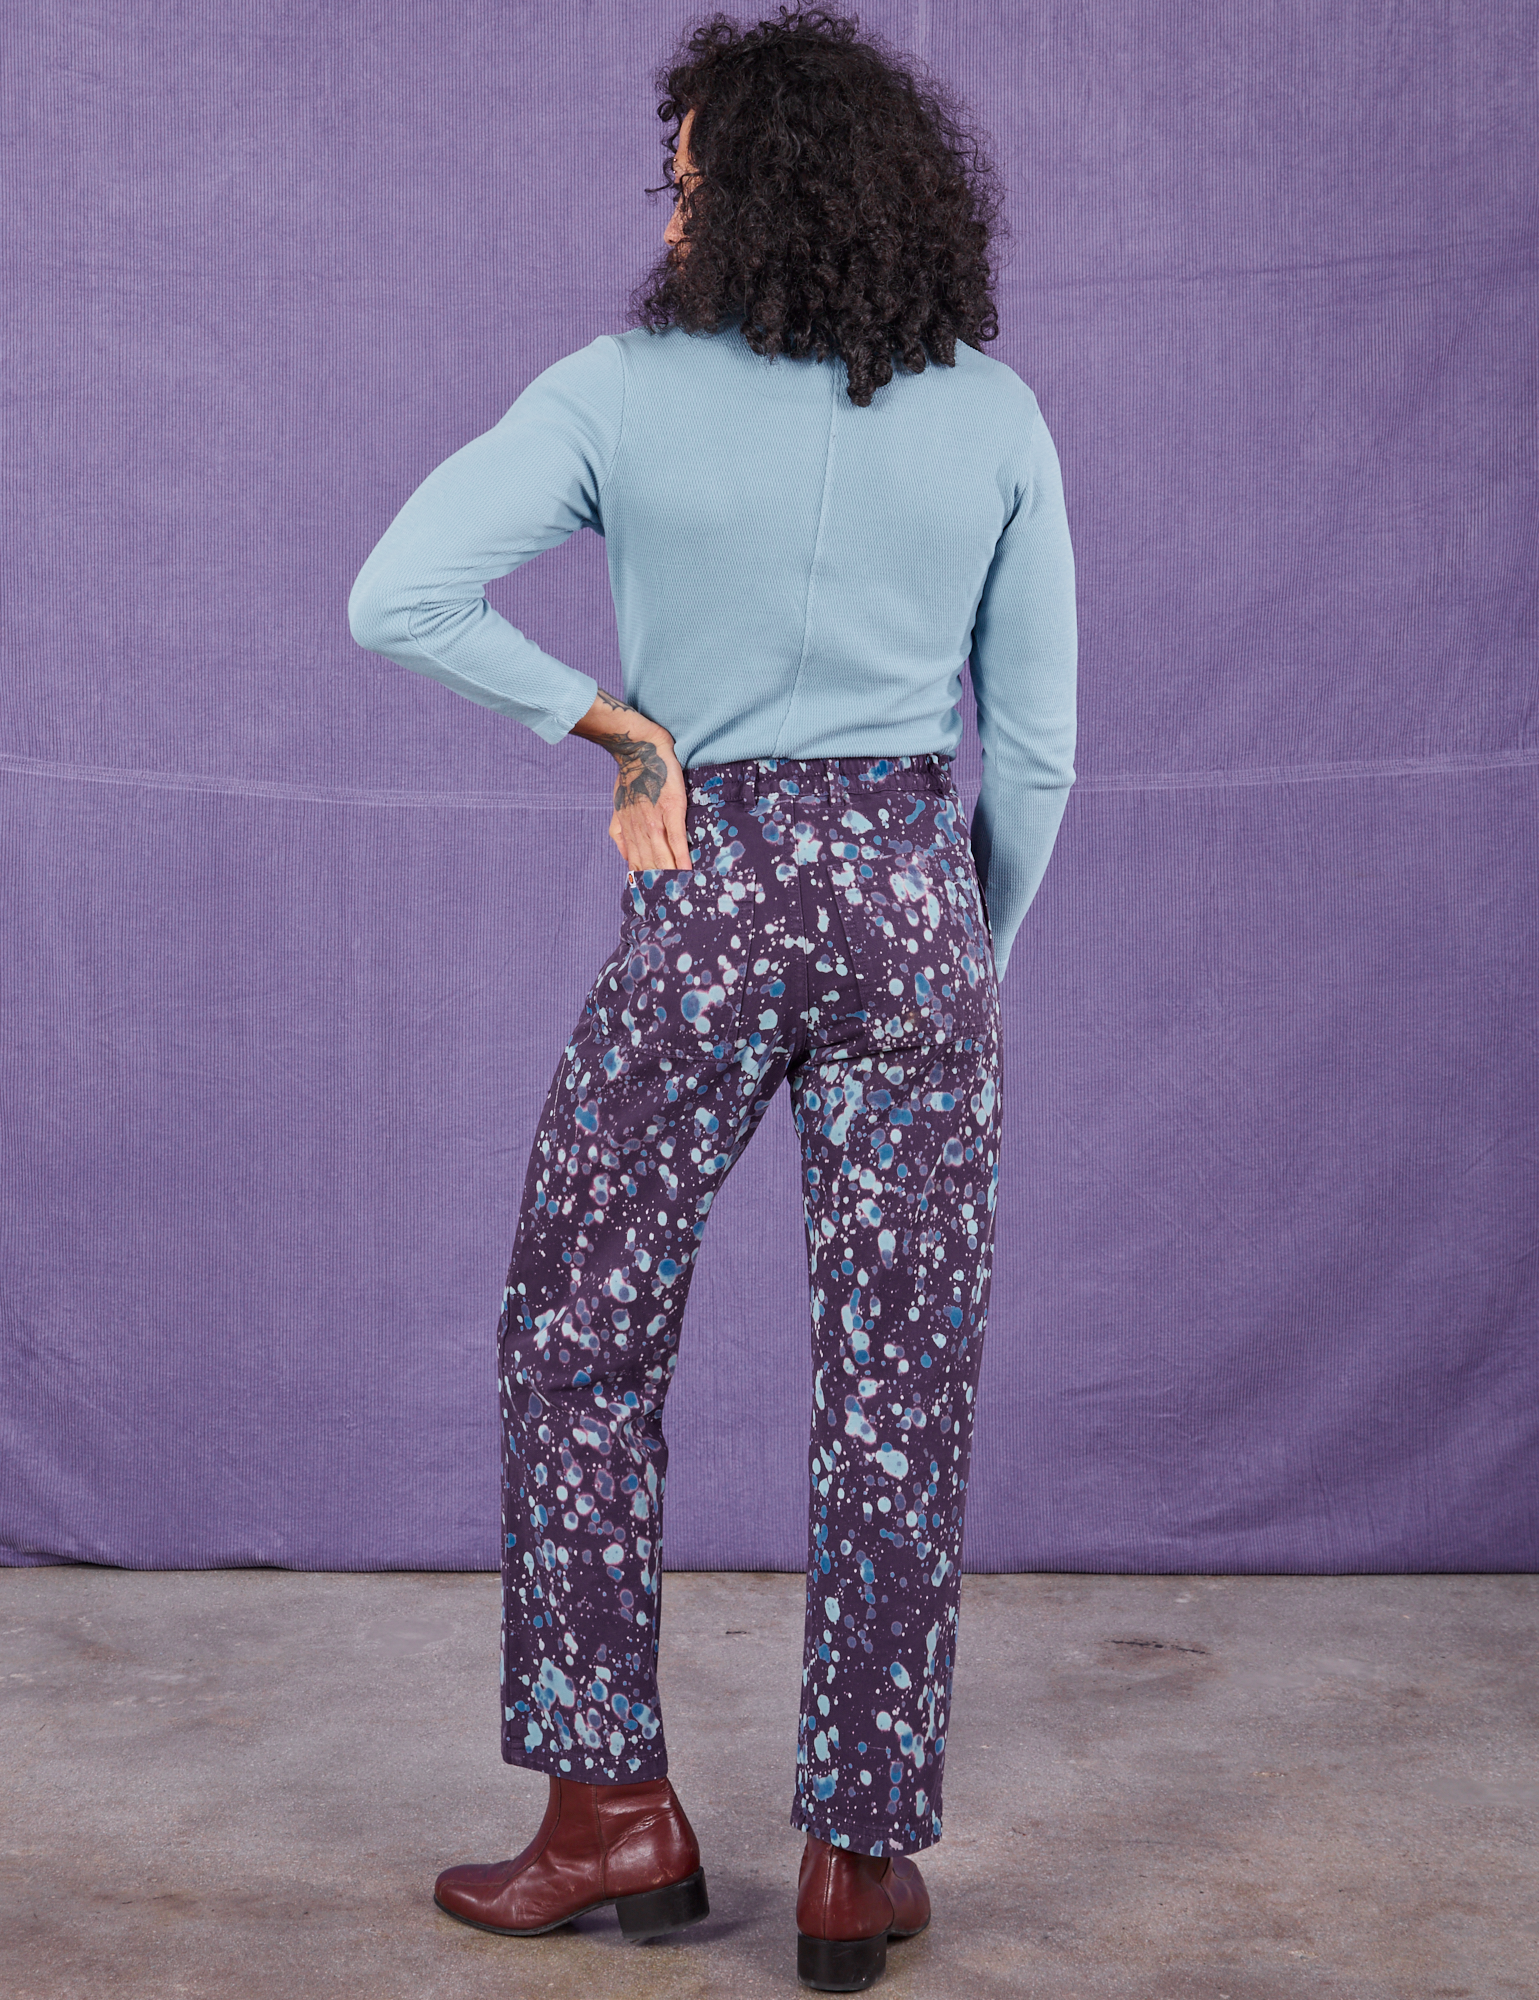 Back view of Marble Splatter Work Pants in Nebula Purple and baby blue Long Sleeve Fisherman Polo on Jesse